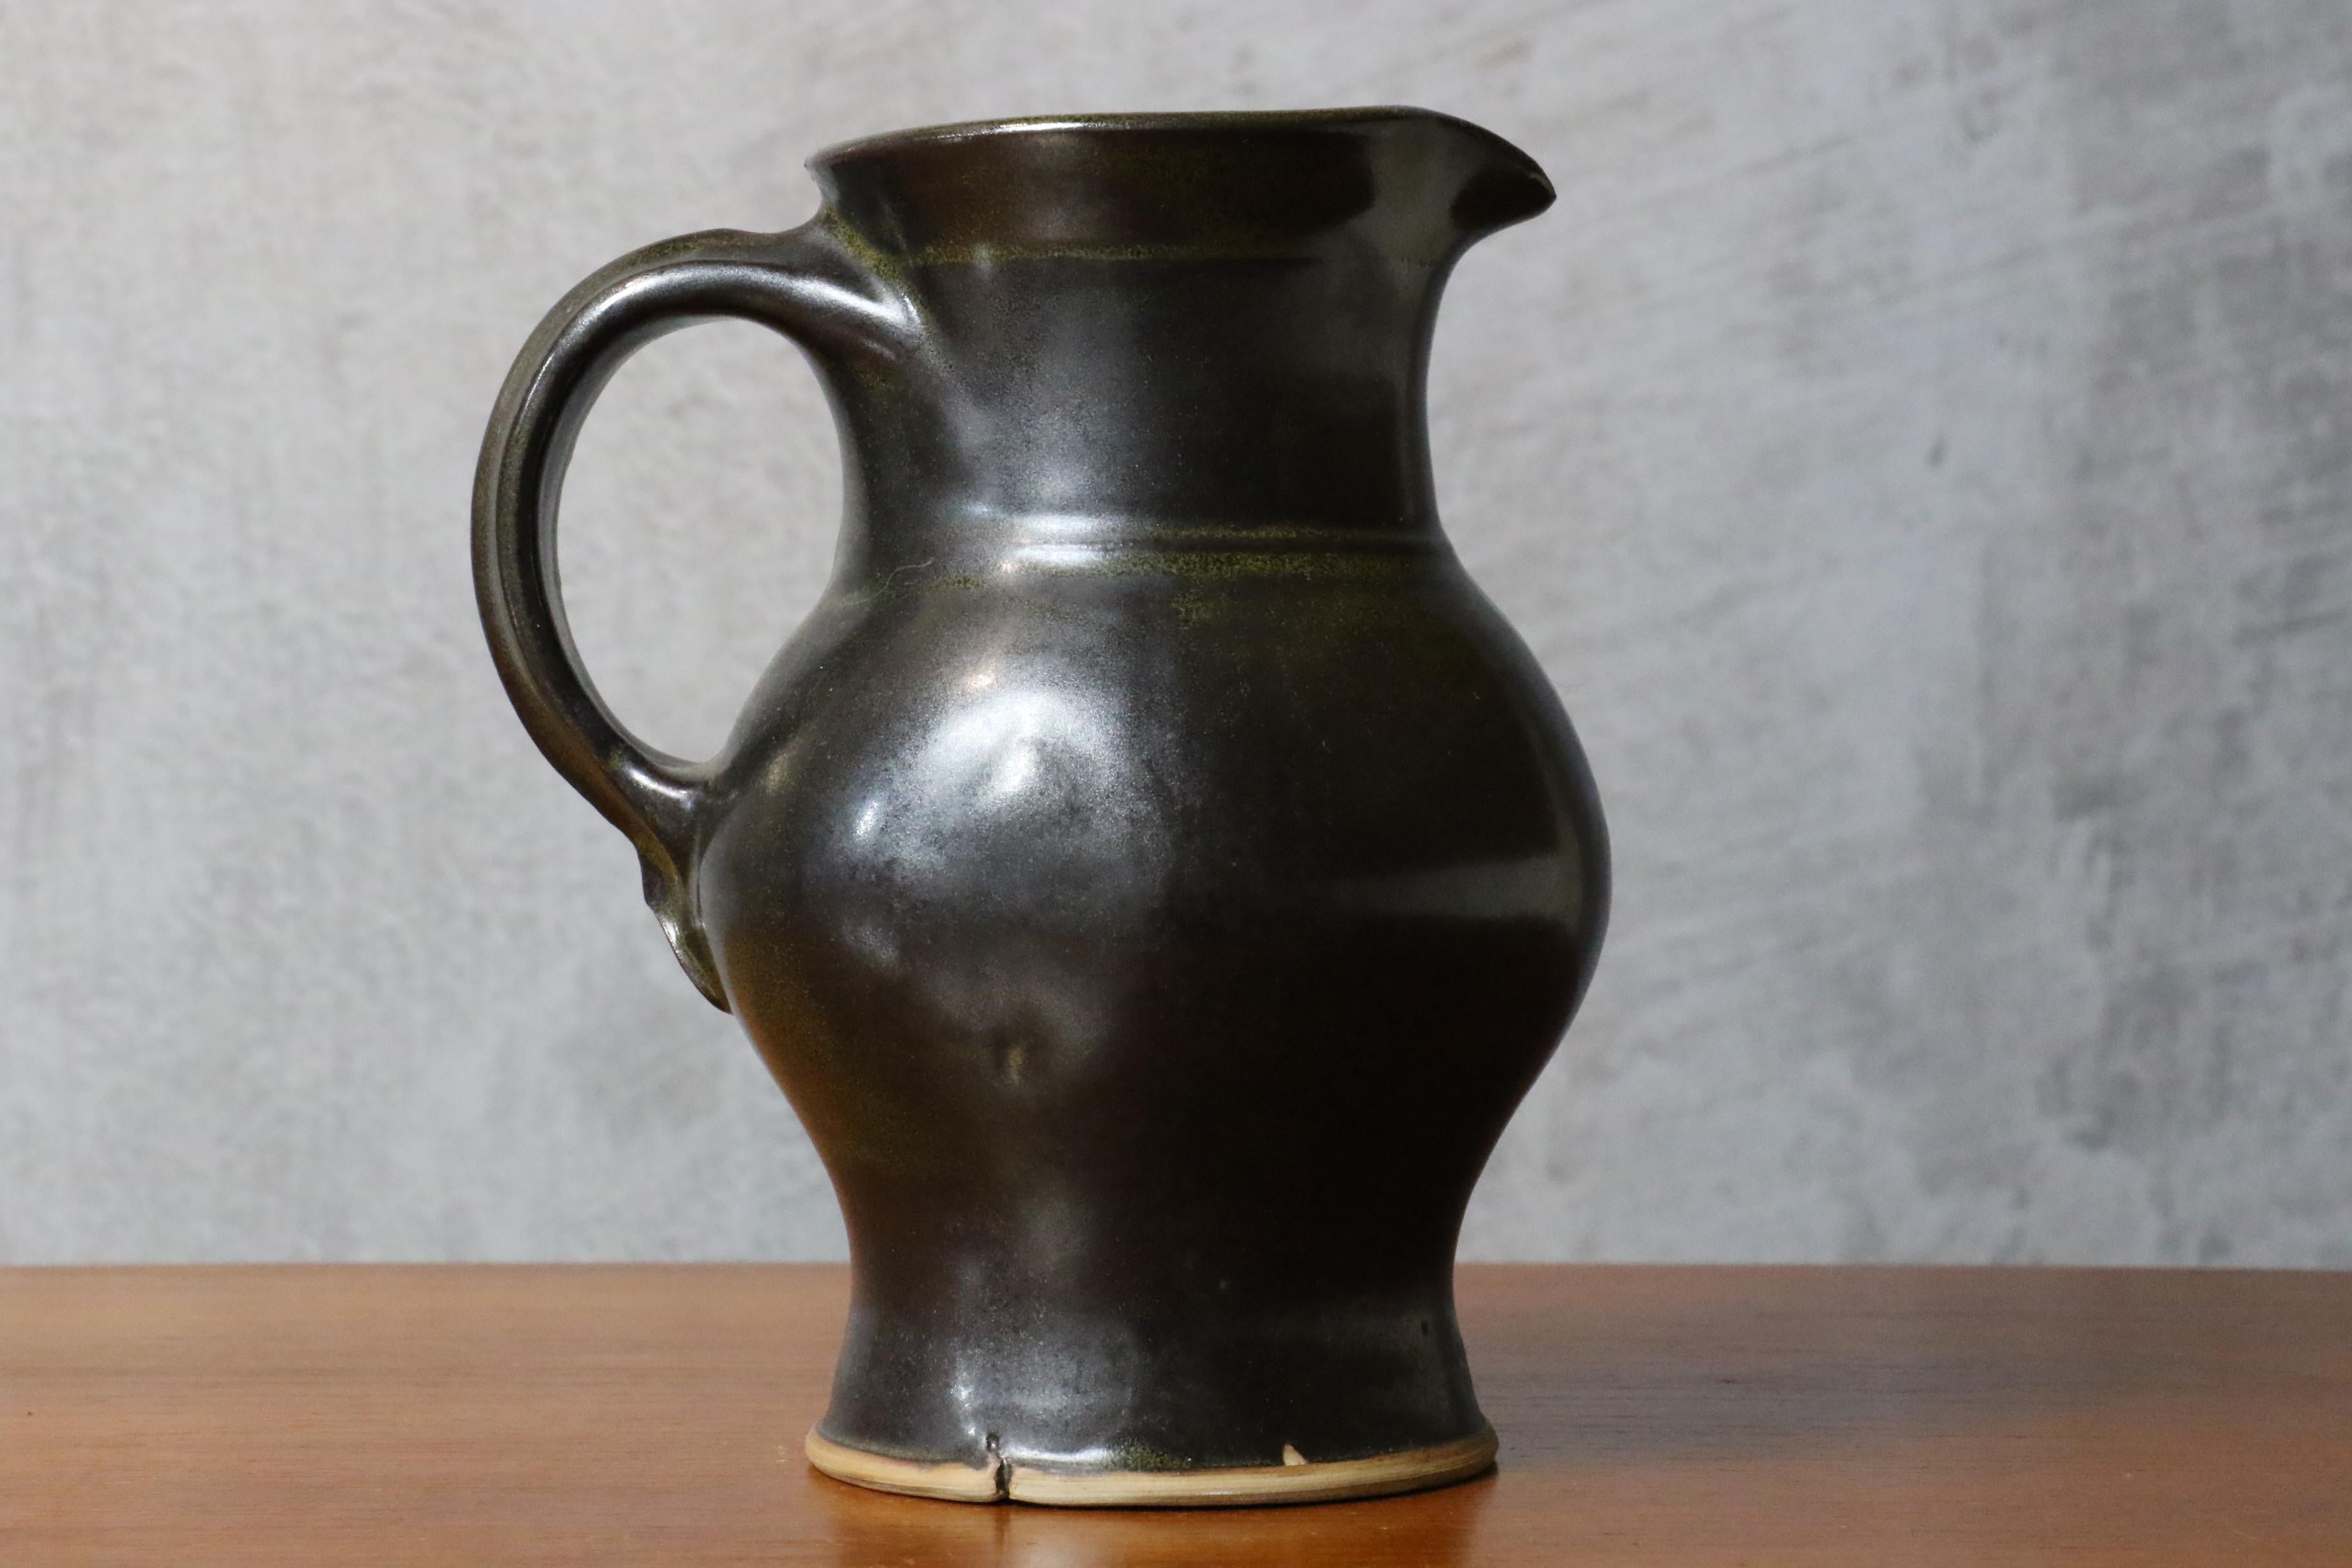 Black glazed ceramic pitcher with green glints by Jean Girel, French ceramist

This is a very beautiful ceramic pitcher. The shape of the jug and the handle remind us of the shapes of popular pottery works, while the very refined work of the